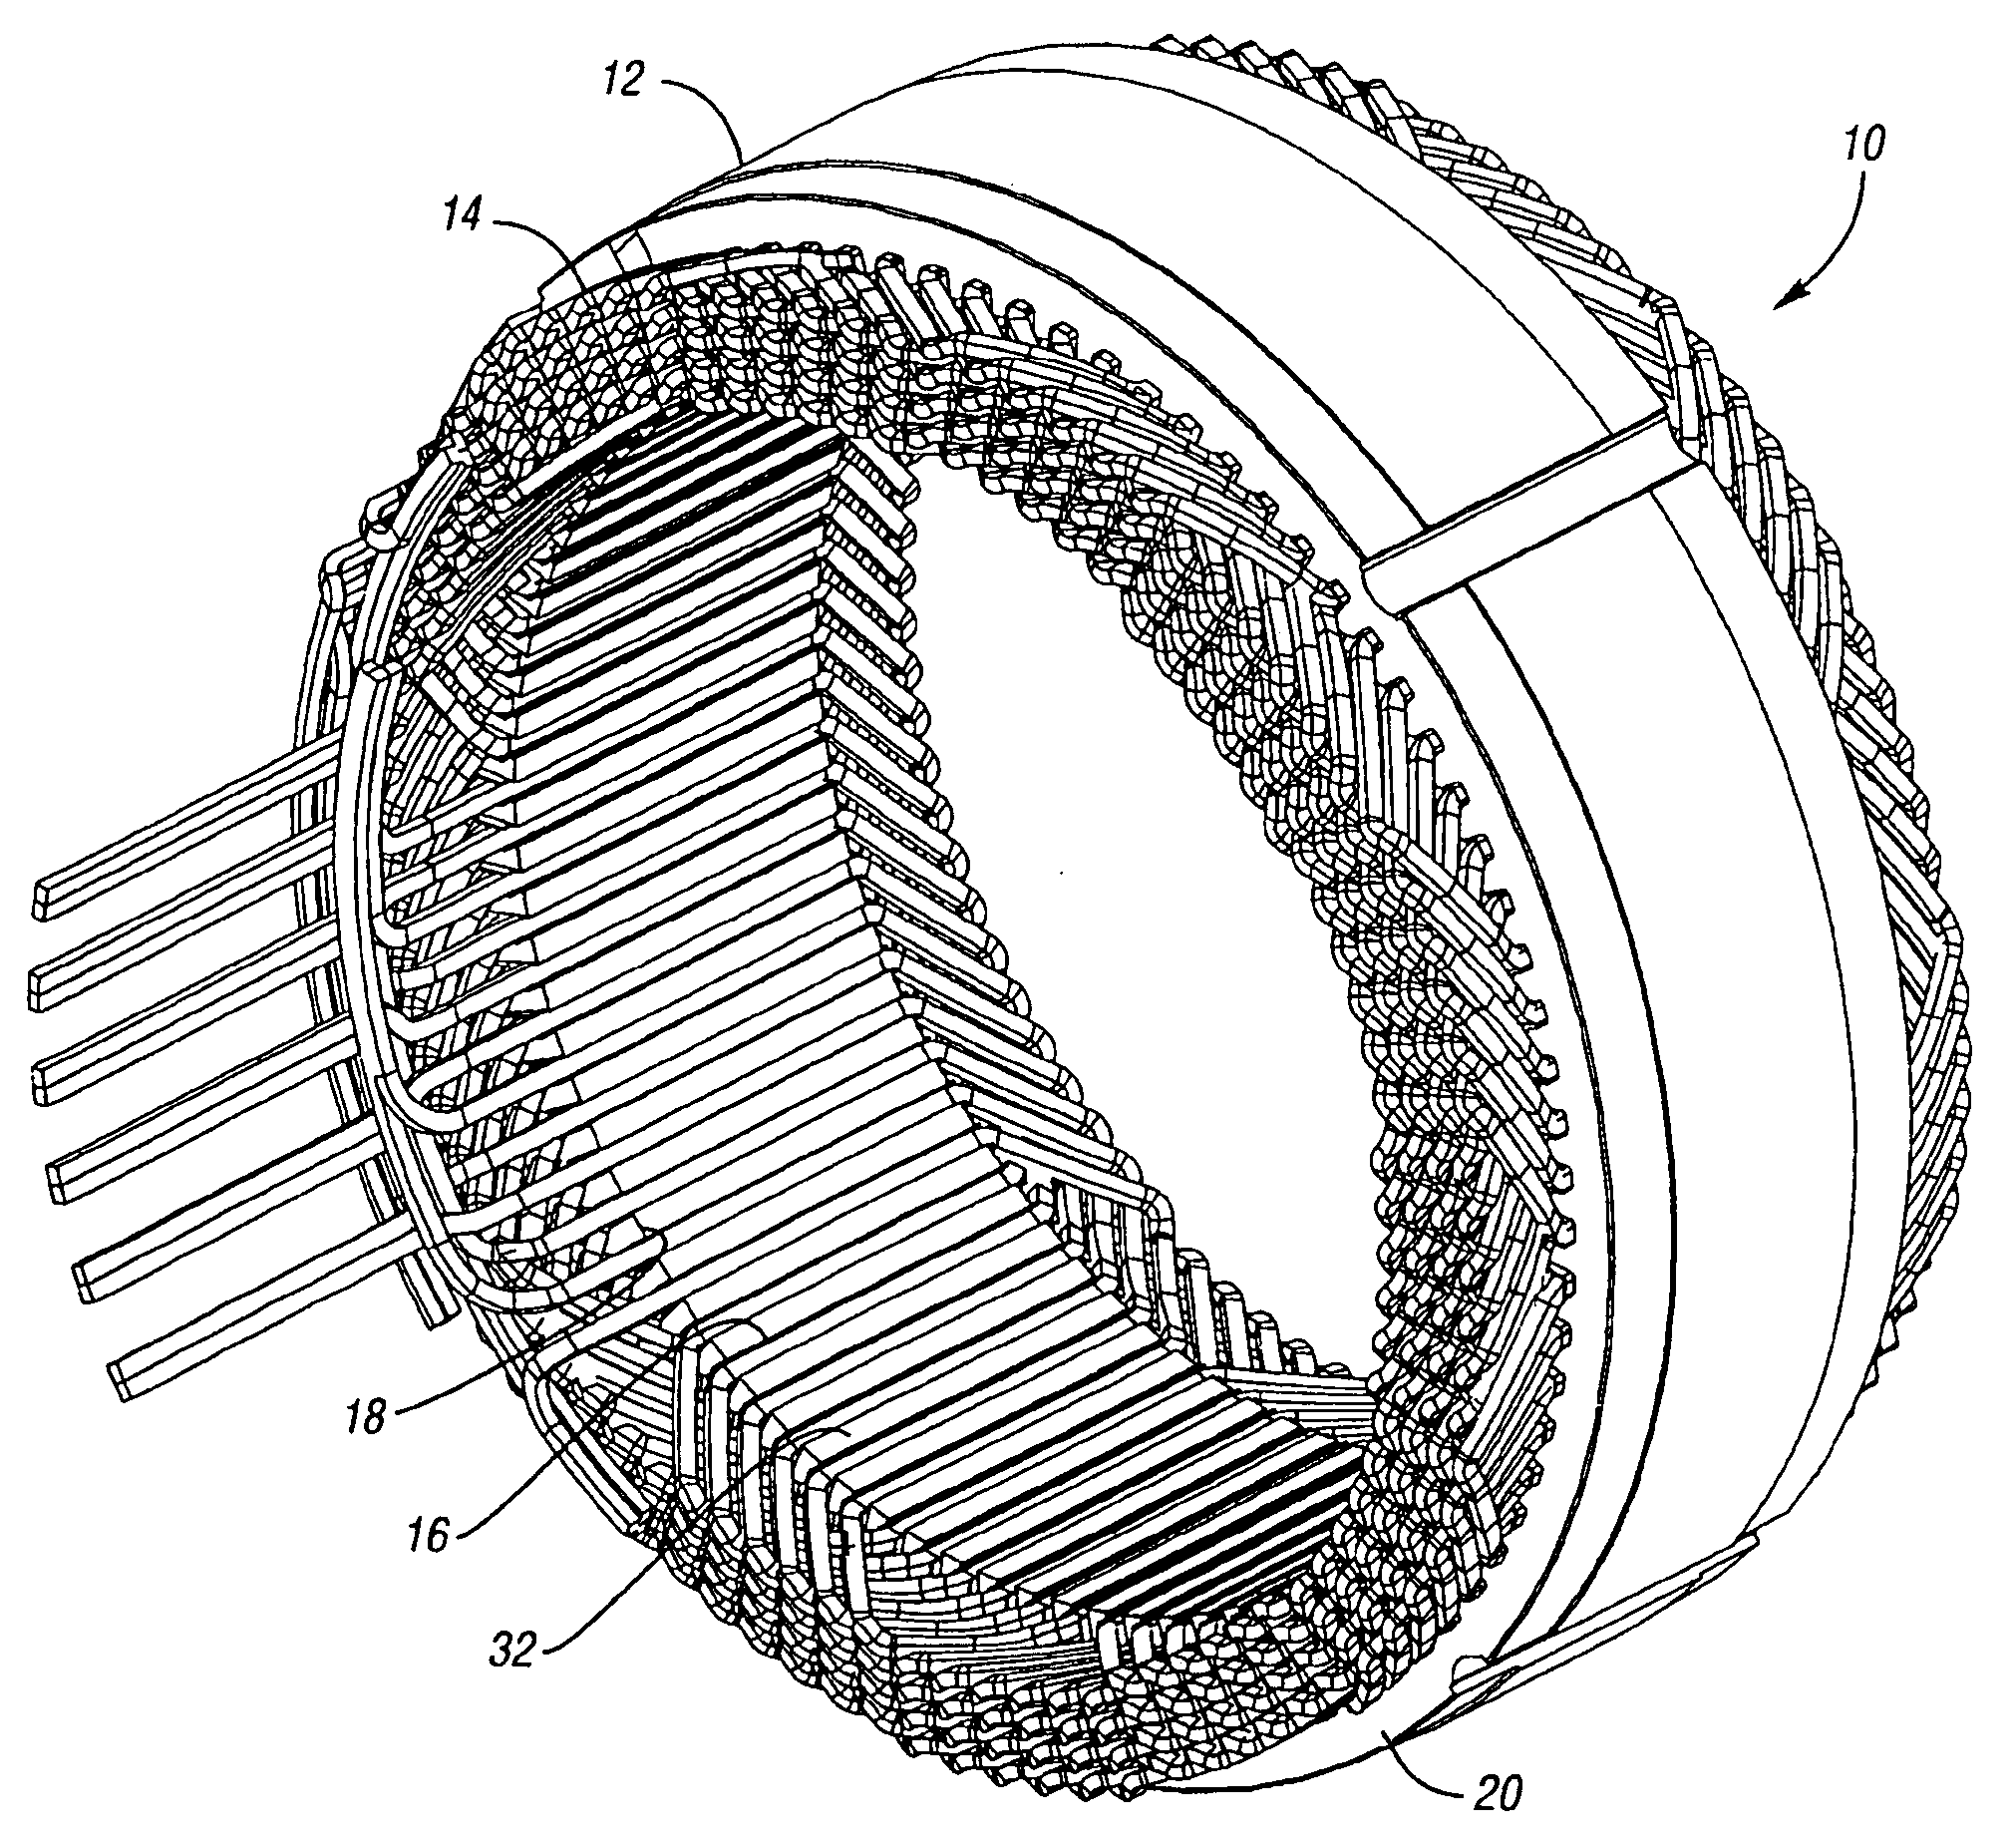 Method of making cascaded multilayer stator winding with interleaved transitions